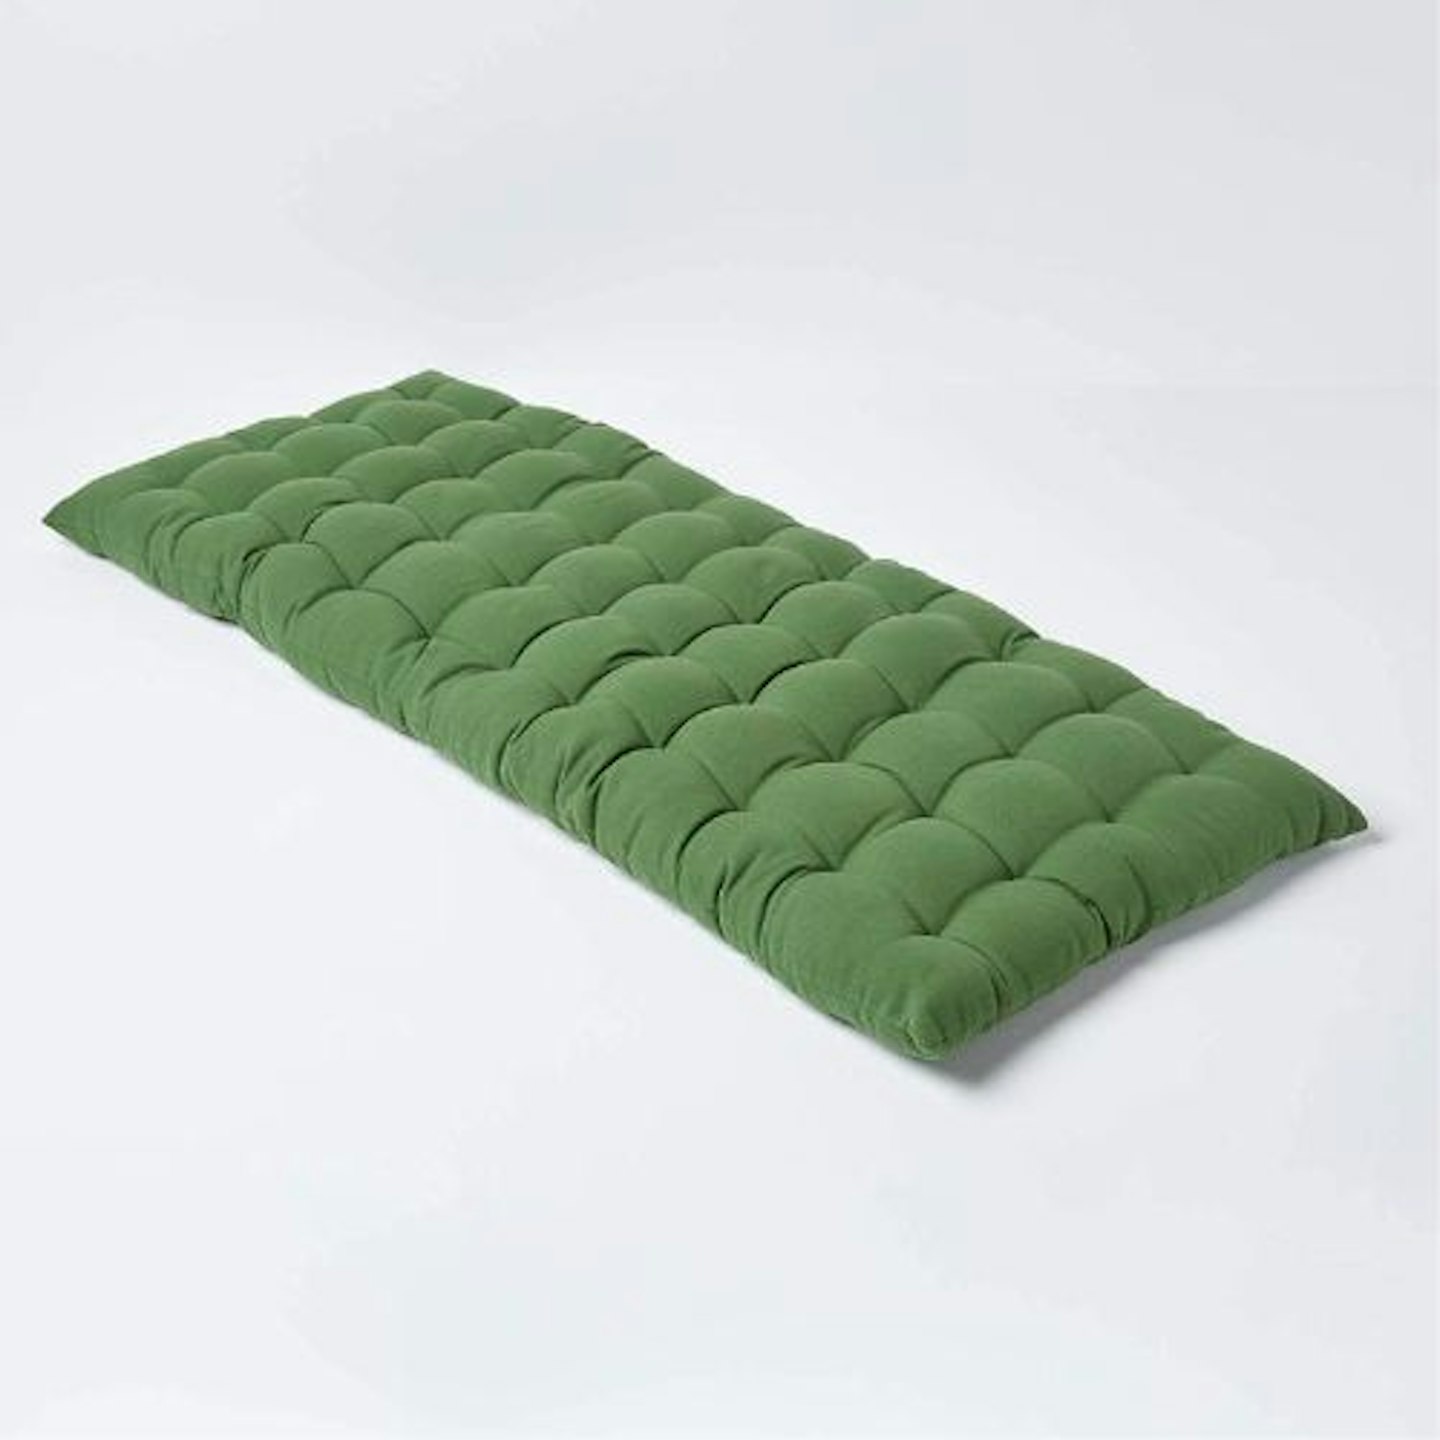 HOMESCAPES Olive Green Garden Bench Cushion